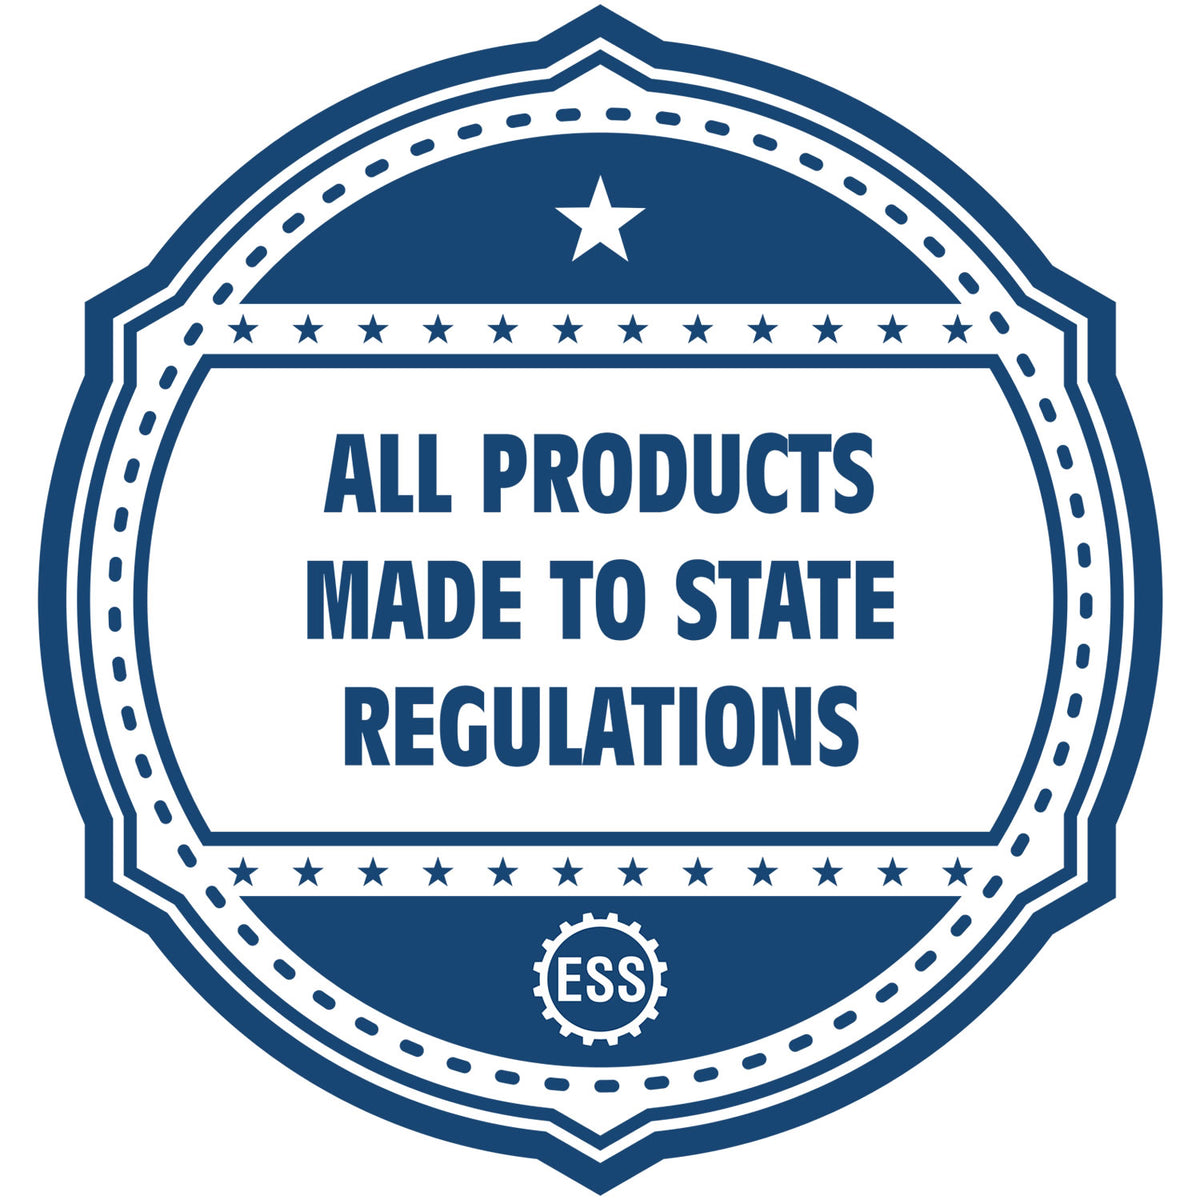 An icon or badge element for the Wooden Handle Idaho Rectangular Notary Public Stamp showing that this product is made in compliance with state regulations.